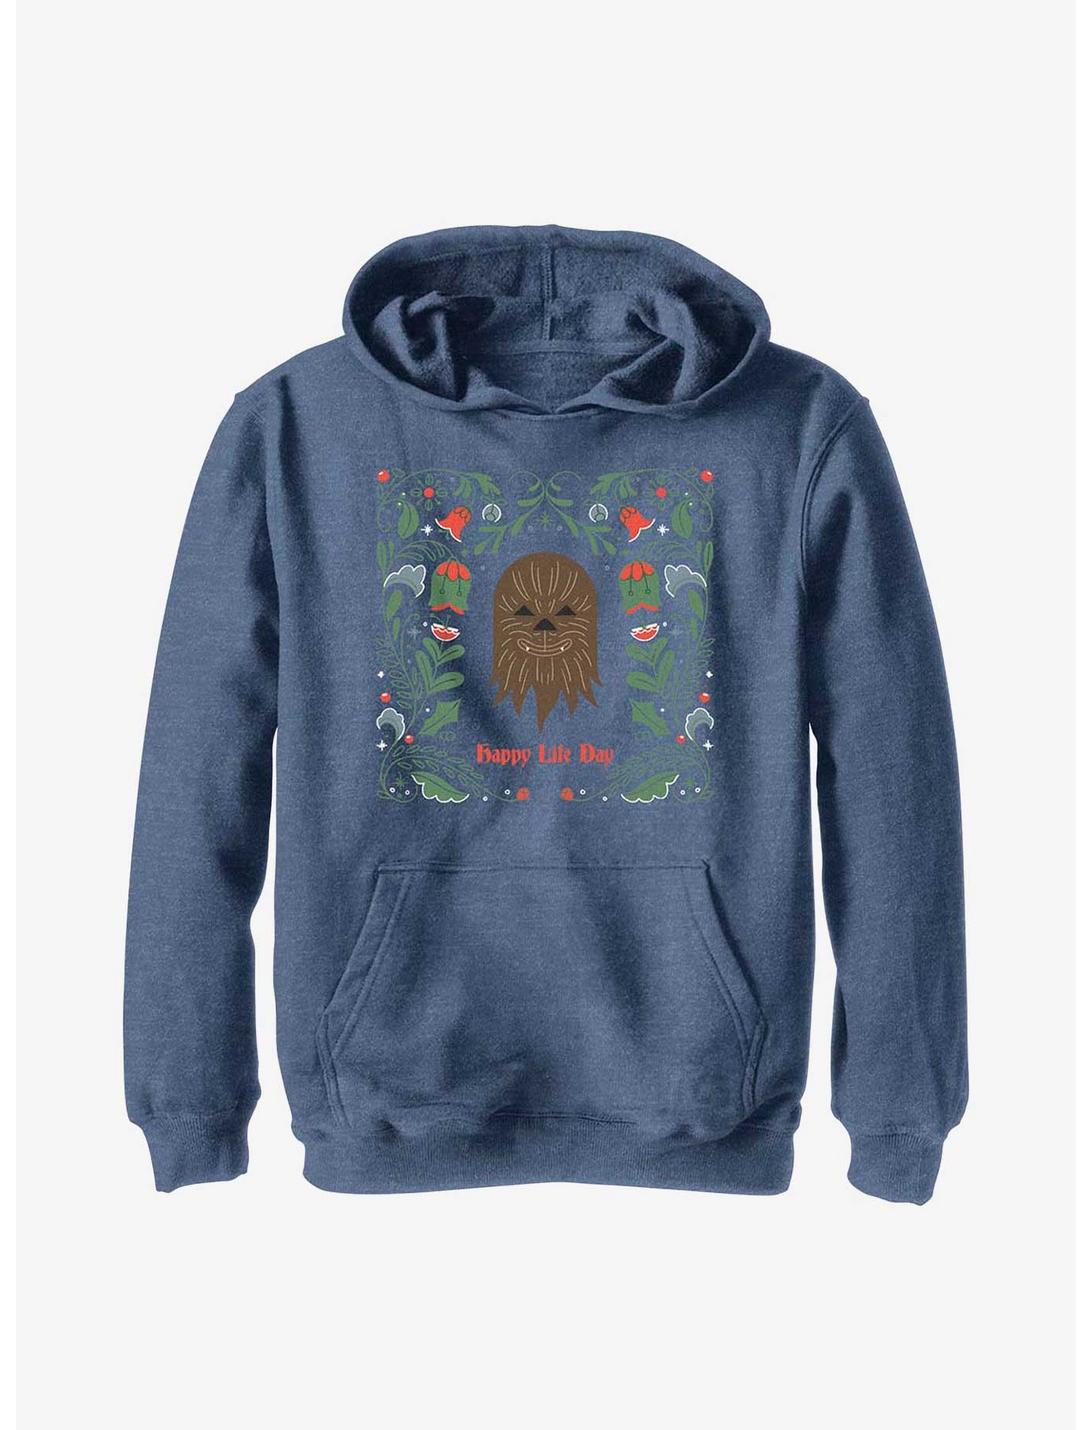 Star Wars Chewie Happy Life Day Youth Hoodie, NAVY HTR, hi-res